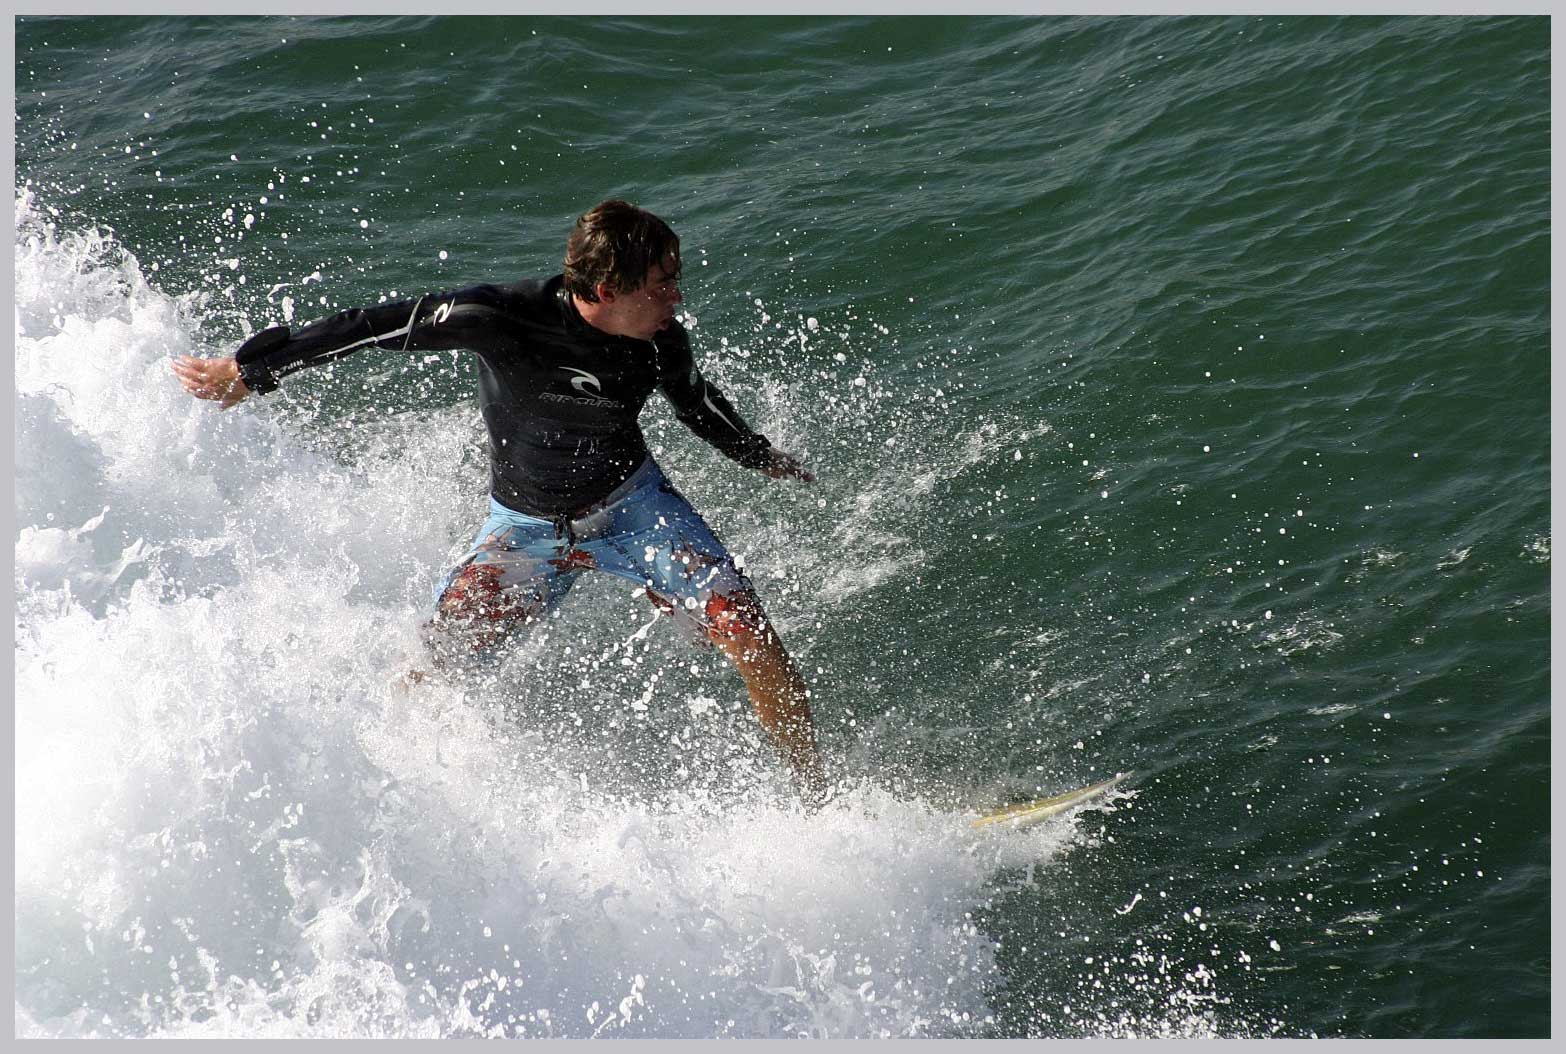 Surfing off the Crystal Pier